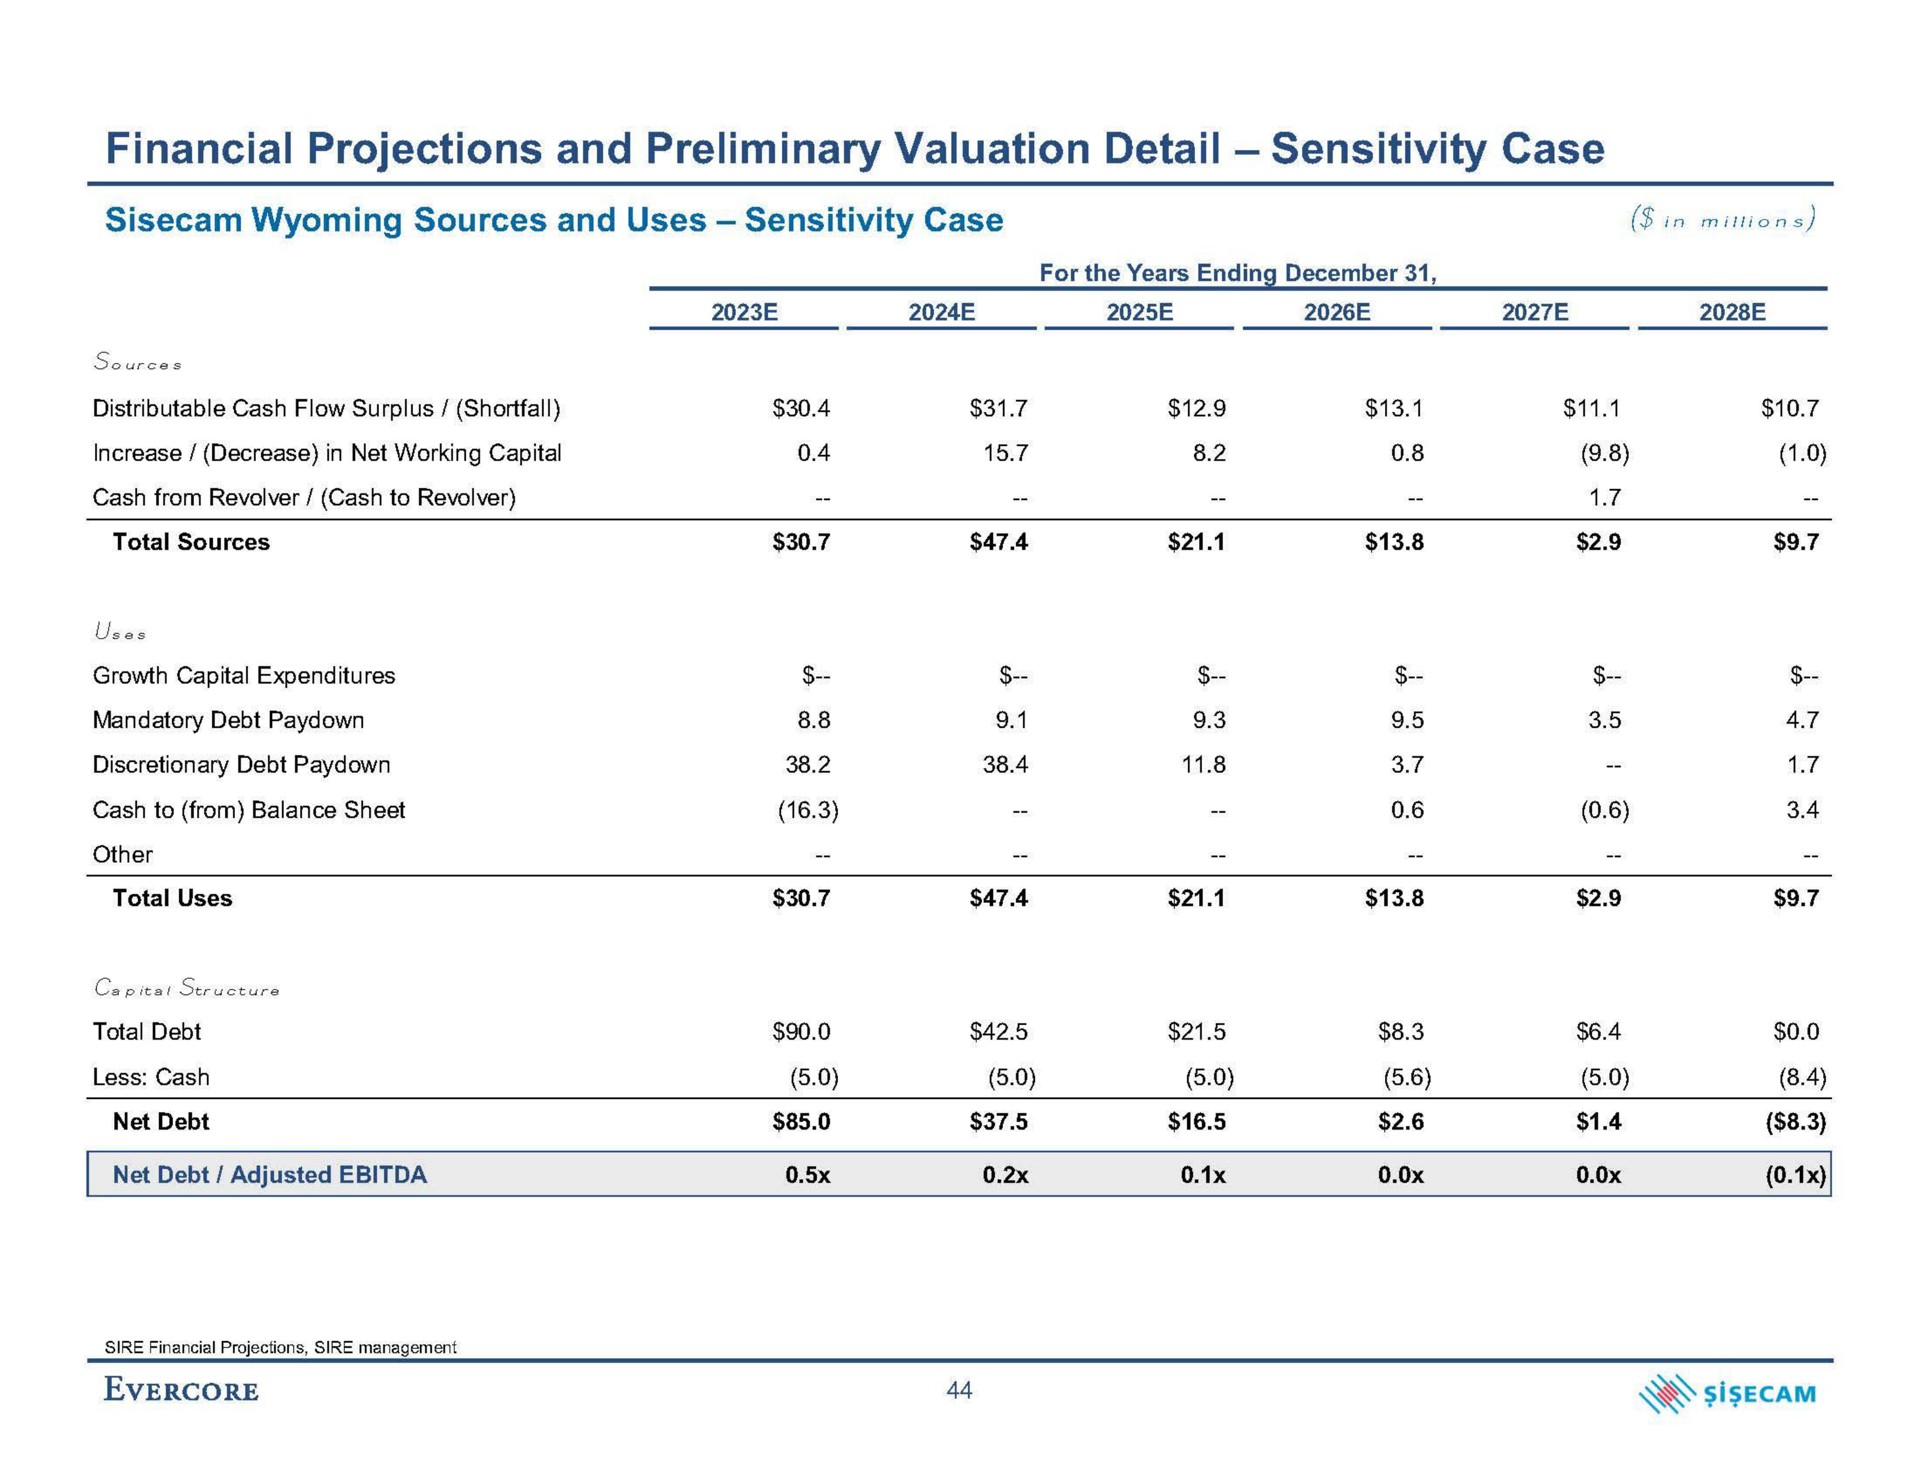 financial projections and preliminary valuation detail sensitivity case sources and uses sensitivity case in | Evercore